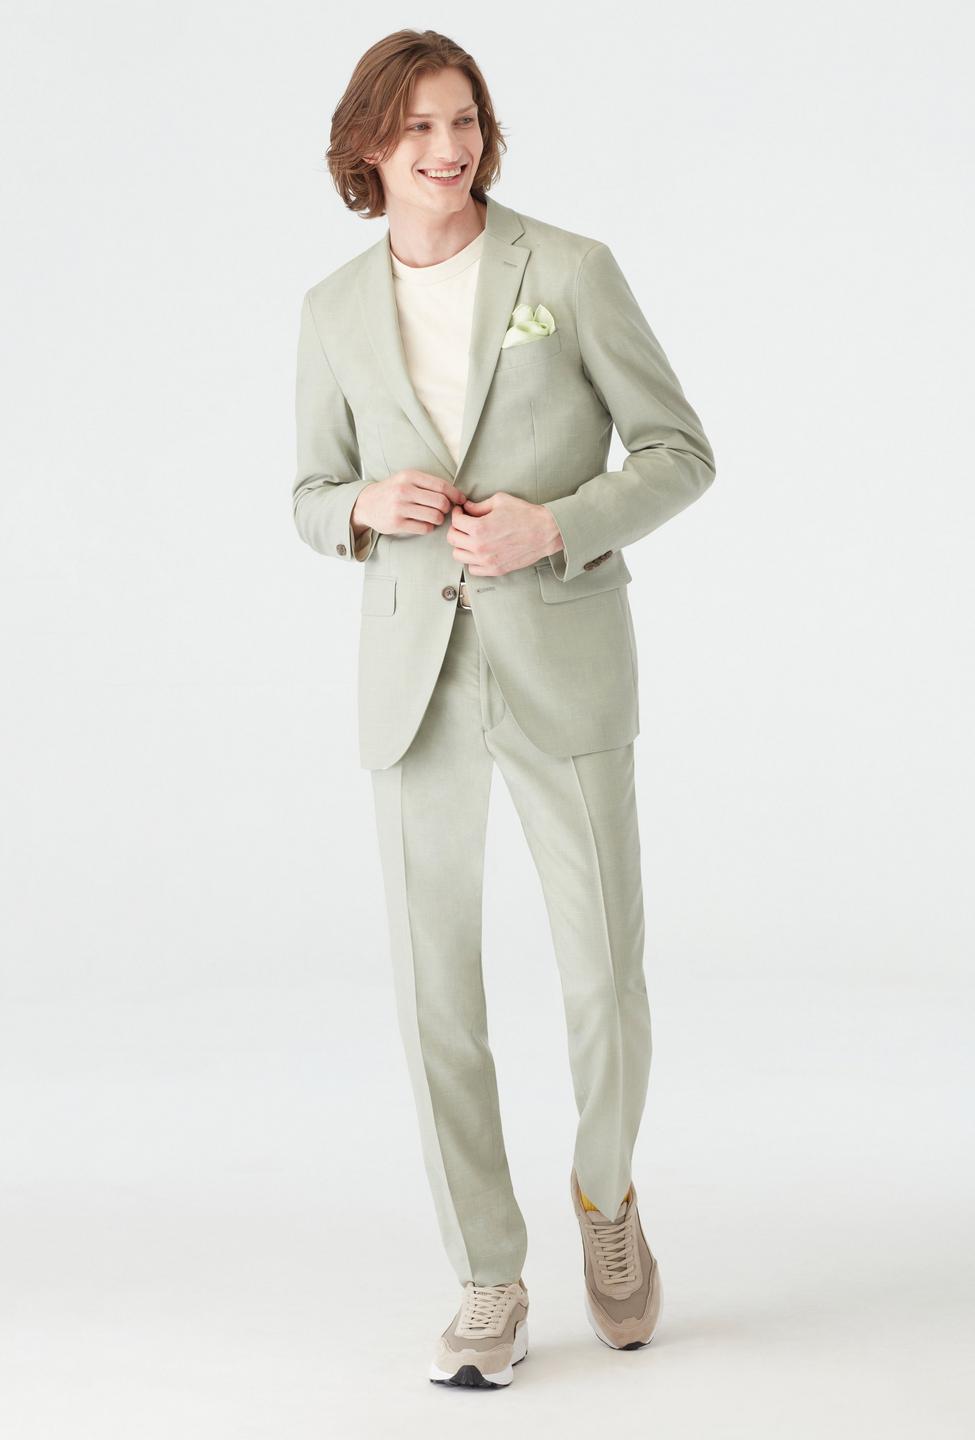 Green suit - Solid Design from Seasonal Indochino Collection